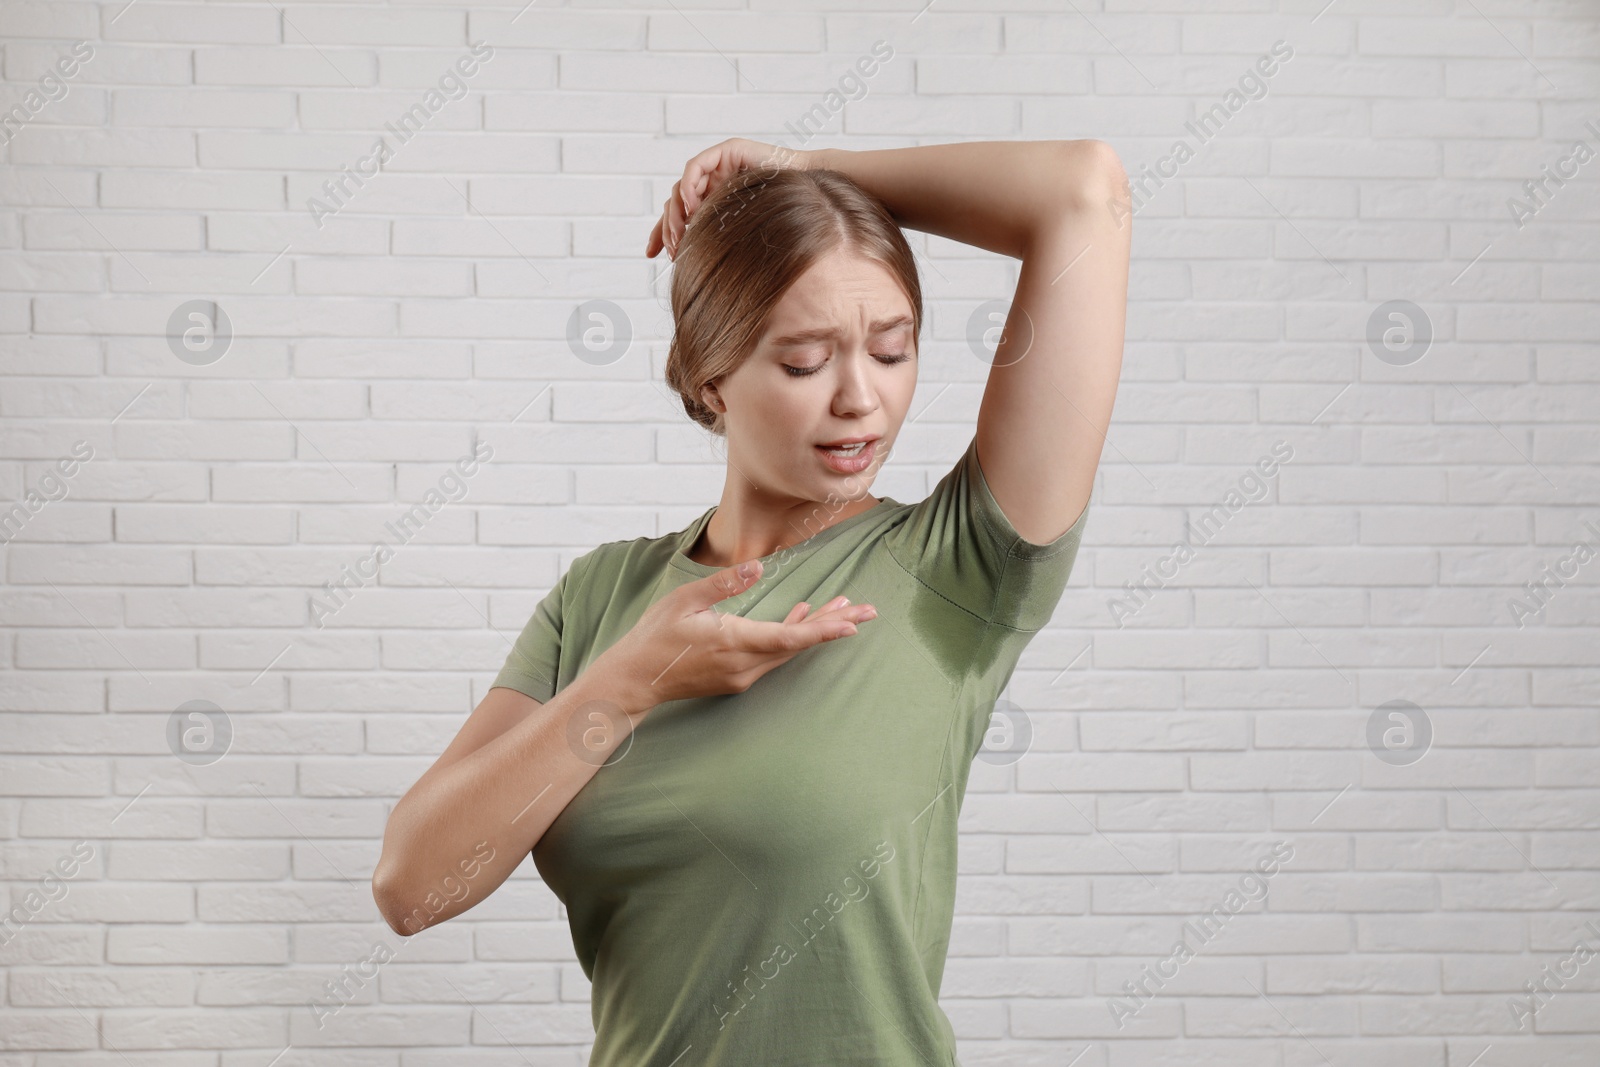 Photo of Young woman with sweat stain on her clothes against brick wall. Using deodorant